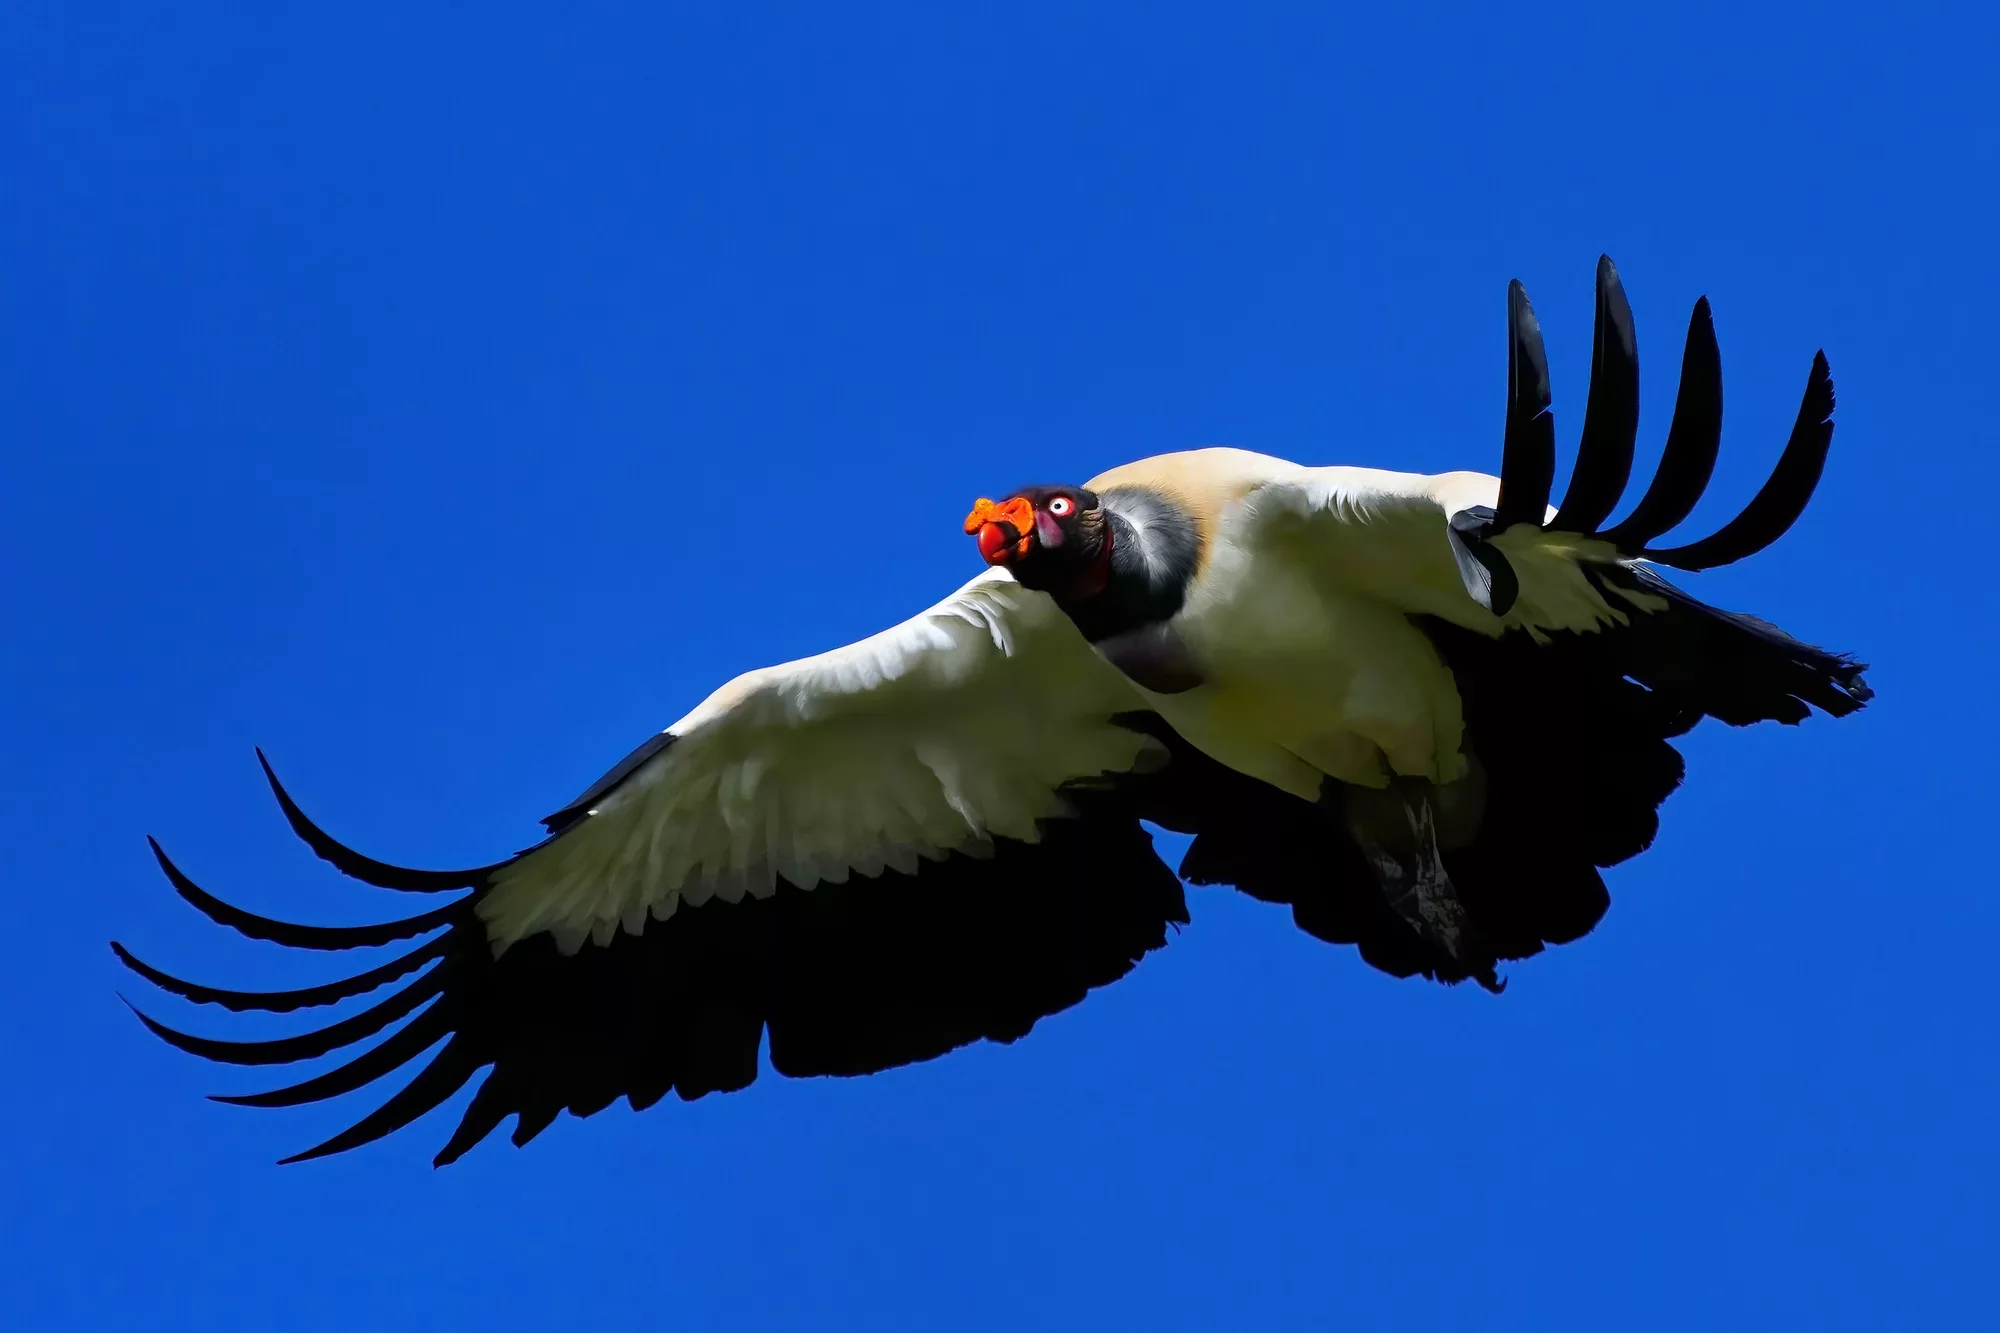 Costa Rica photo tour with Don Mammoser - King Vulture